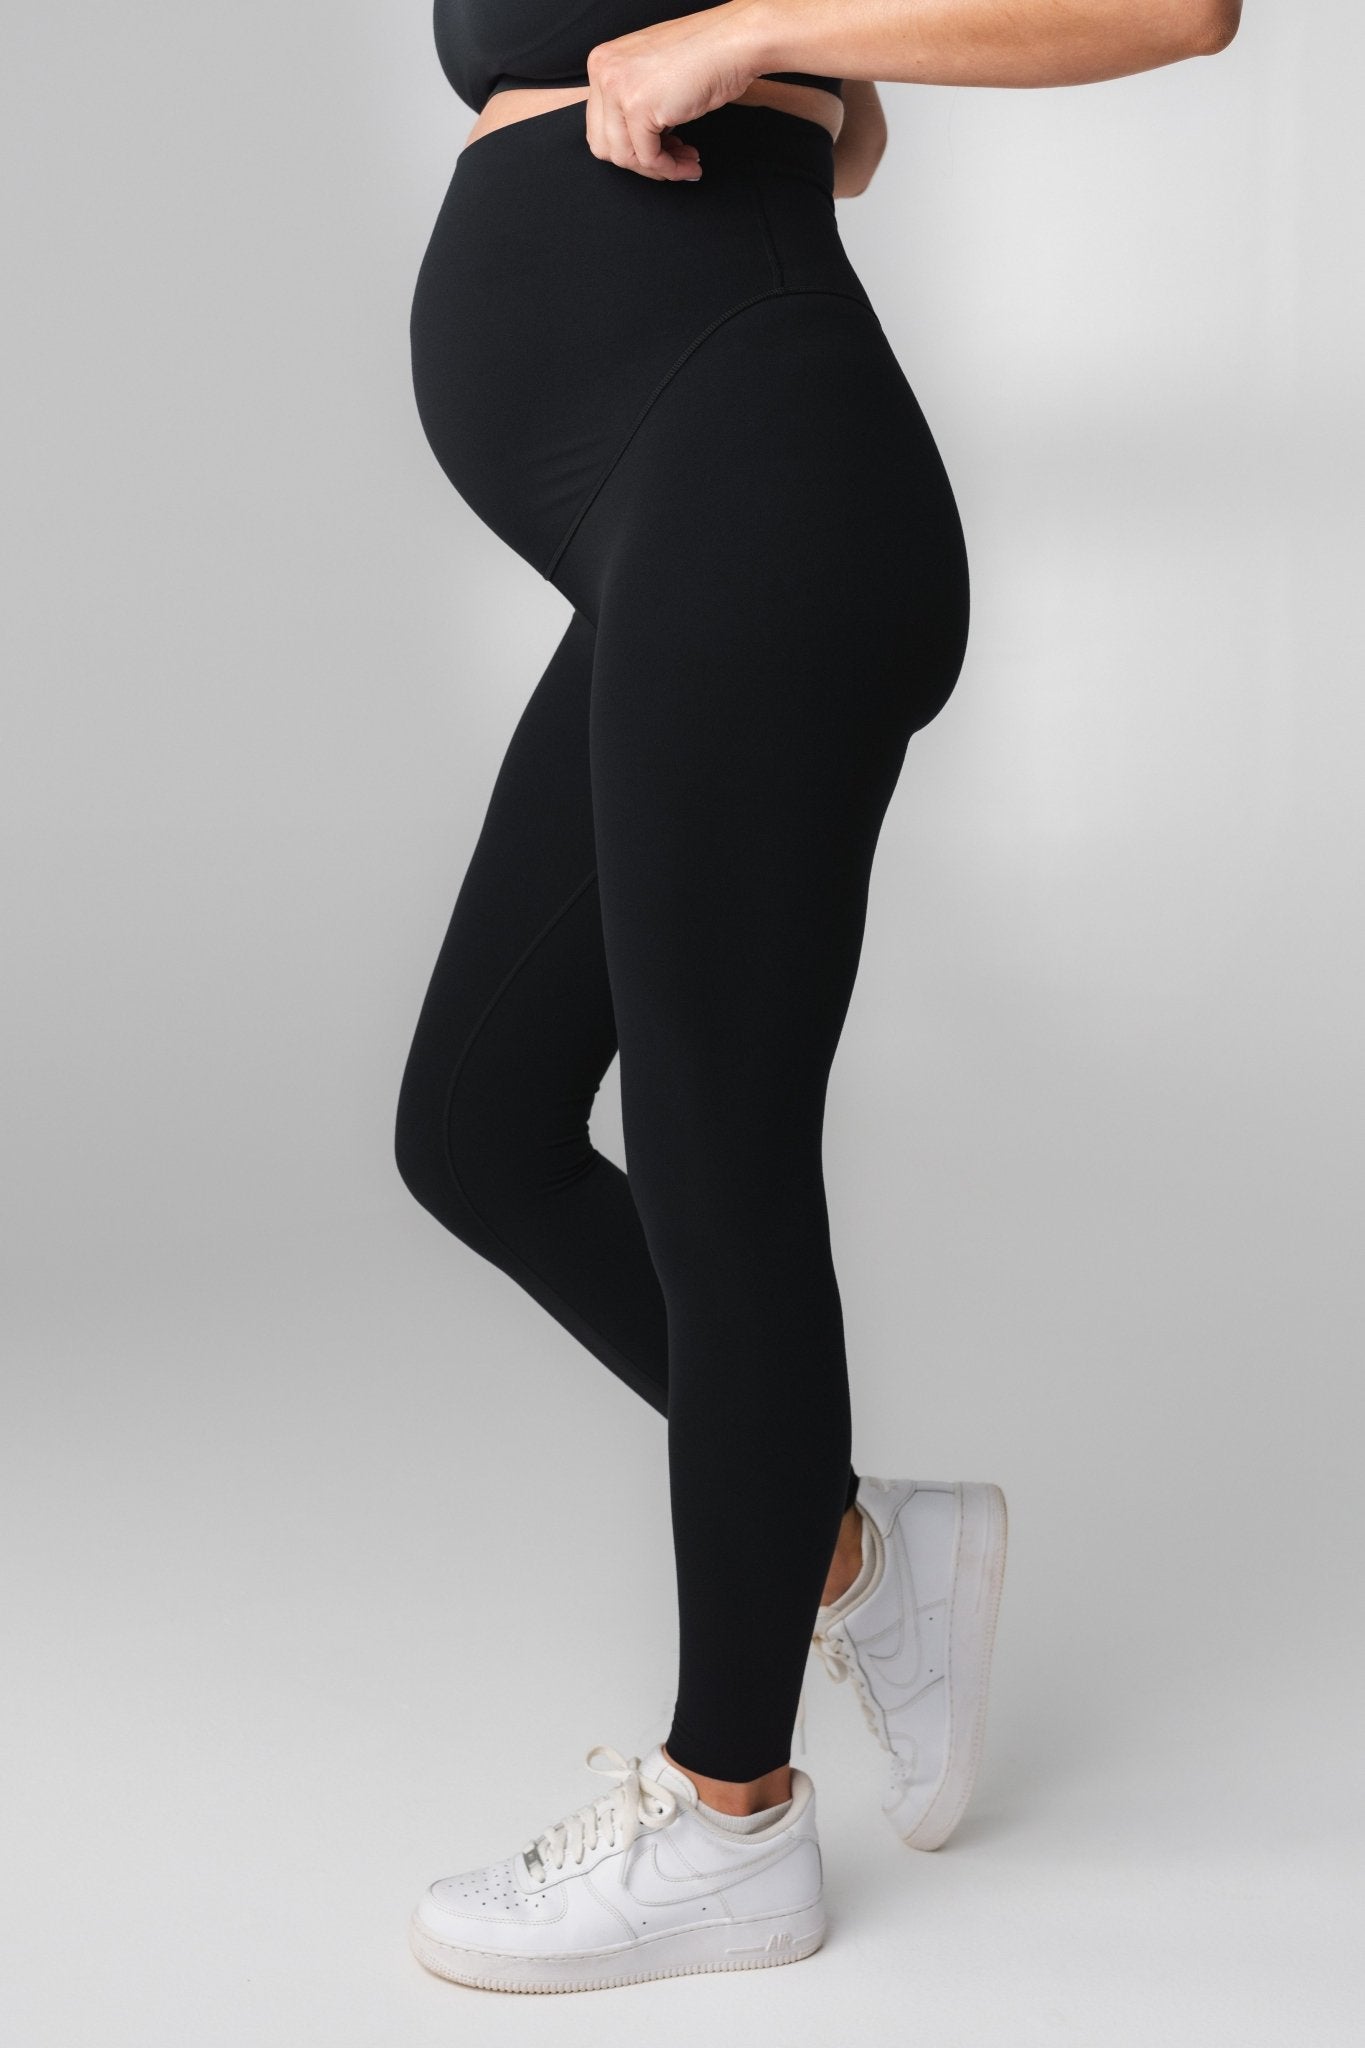 Foucome Women's Maternity Leggings Over The Belly Pregnancy Active Workout  Yoga Tights Pants Black-2pack, Small at Amazon Women's Clothing store